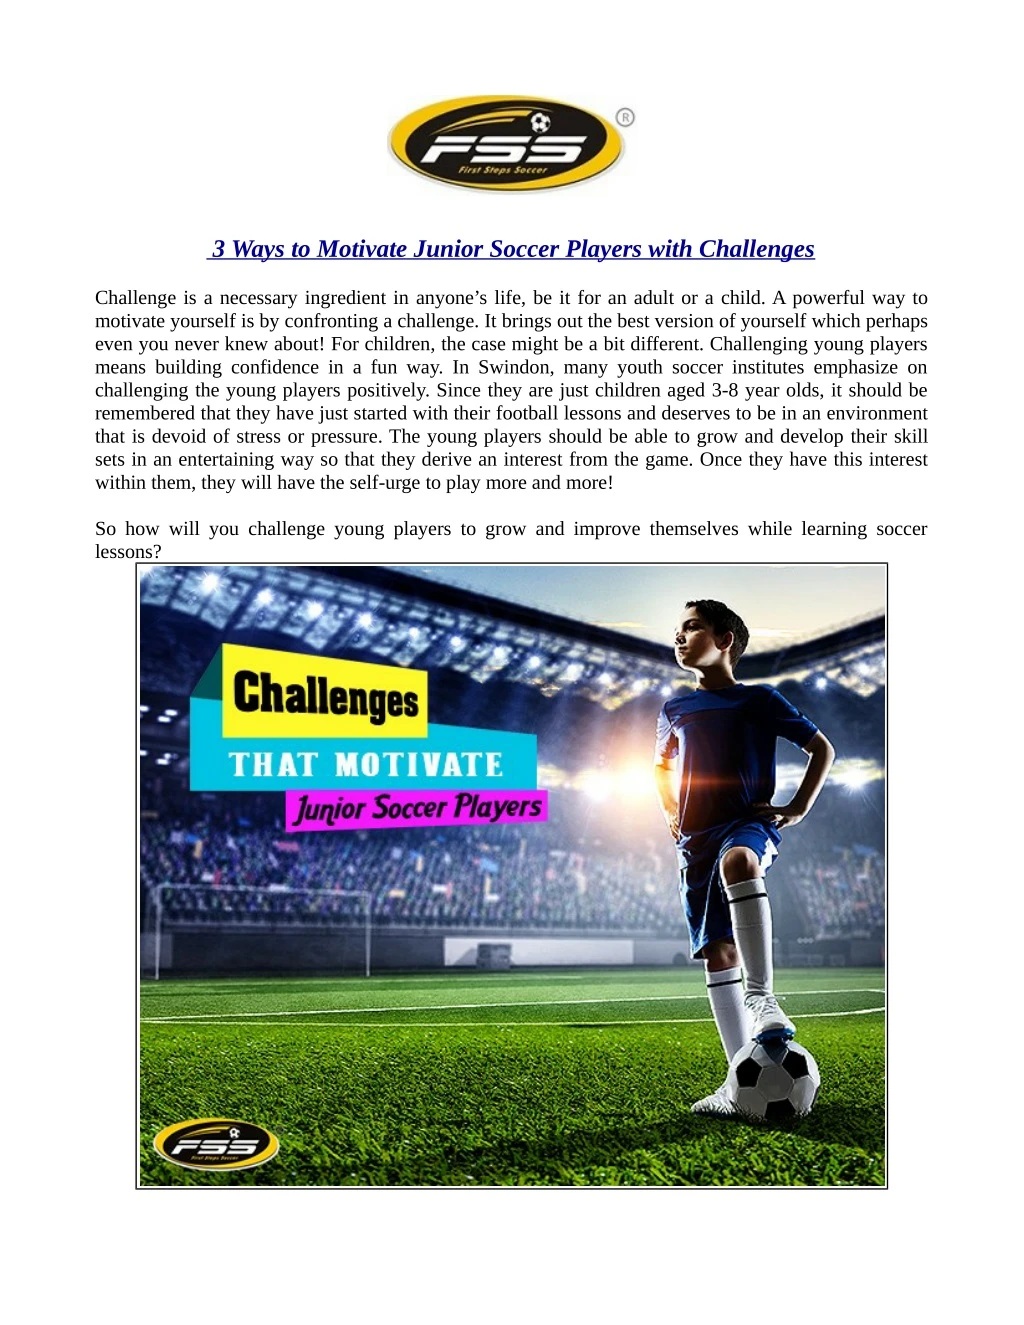 3 ways to motivate junior soccer players with